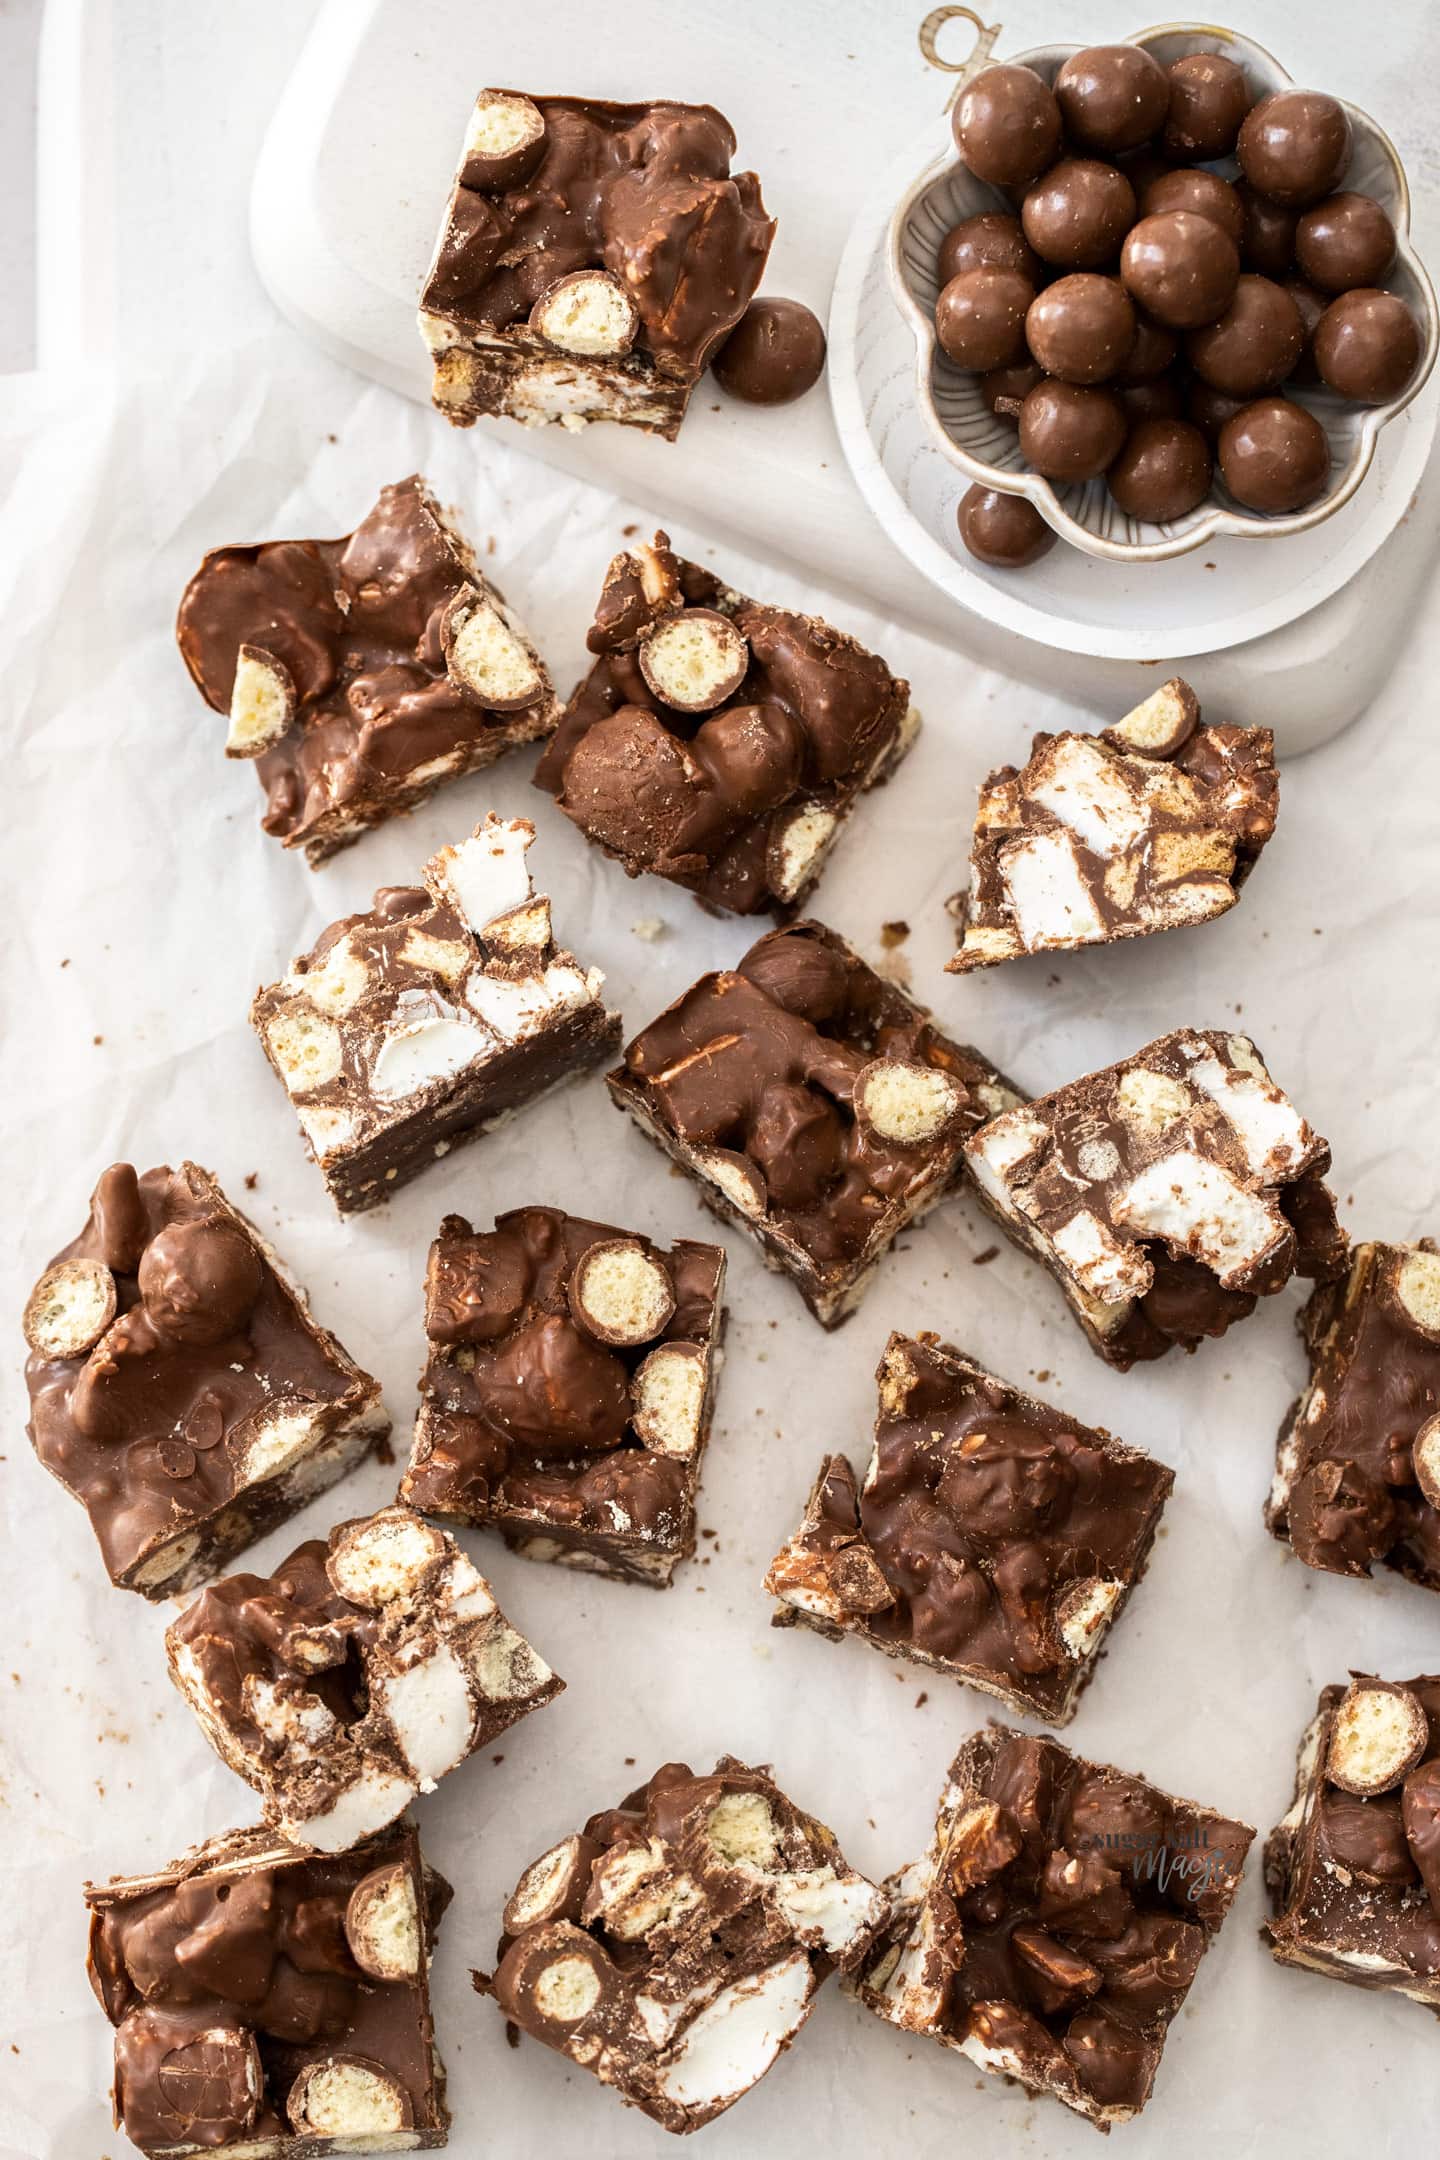 Top down view of cut up Malteser rocky road, showing the inside.